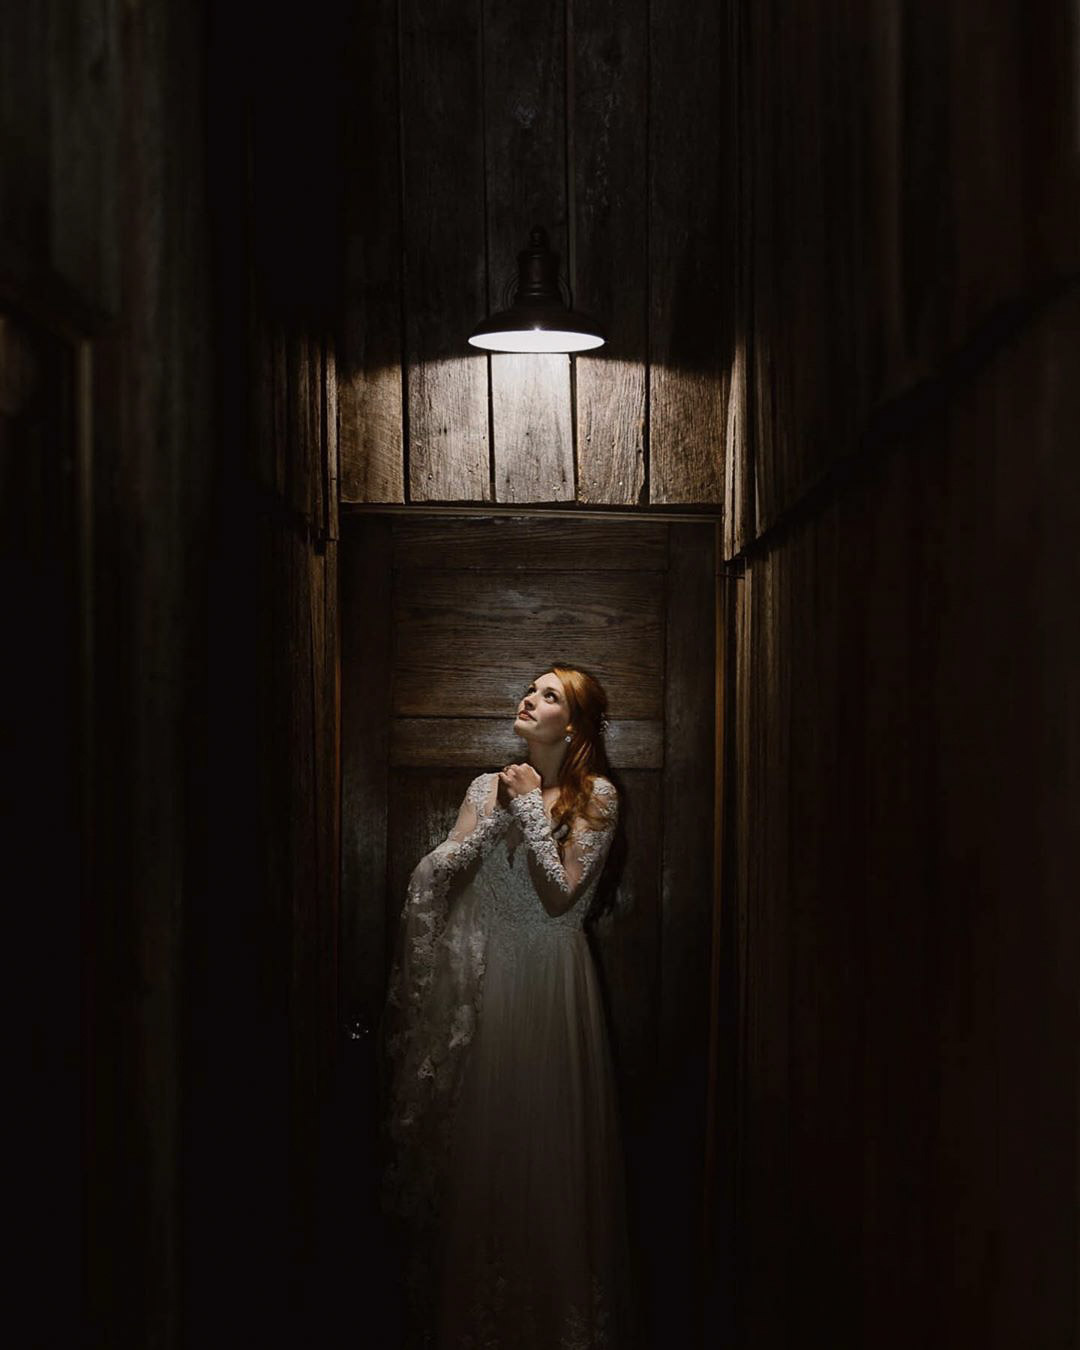 a bride in her wedding attire in a dimly lit room looking up